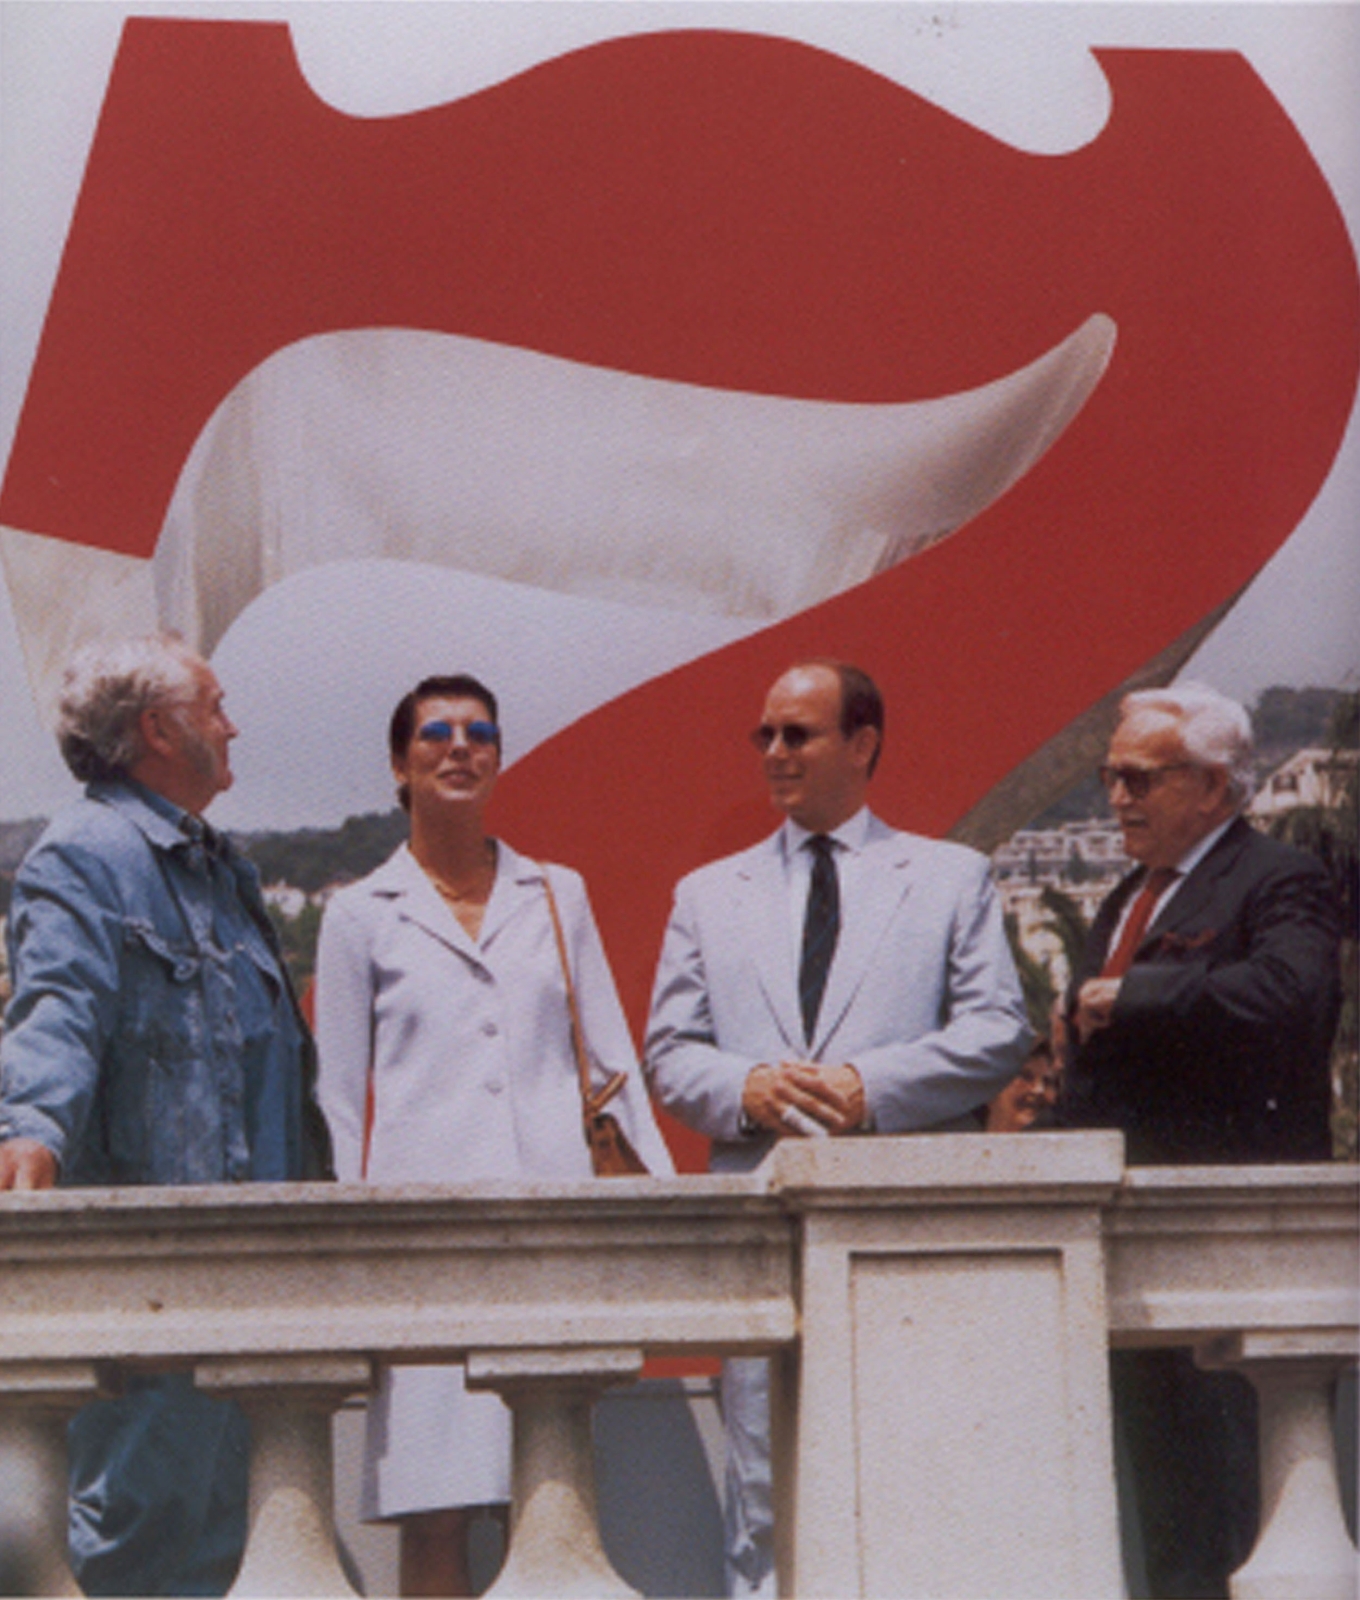 Left to right: Indiana, Princess Stephanie of Monaco, Prince Albert II of Monaco, and an unidentified man, in front of Indiana&amp;rsquo;s sculpture Seven (1980) in Monte Carlo, 1997

Courtesy of the artist